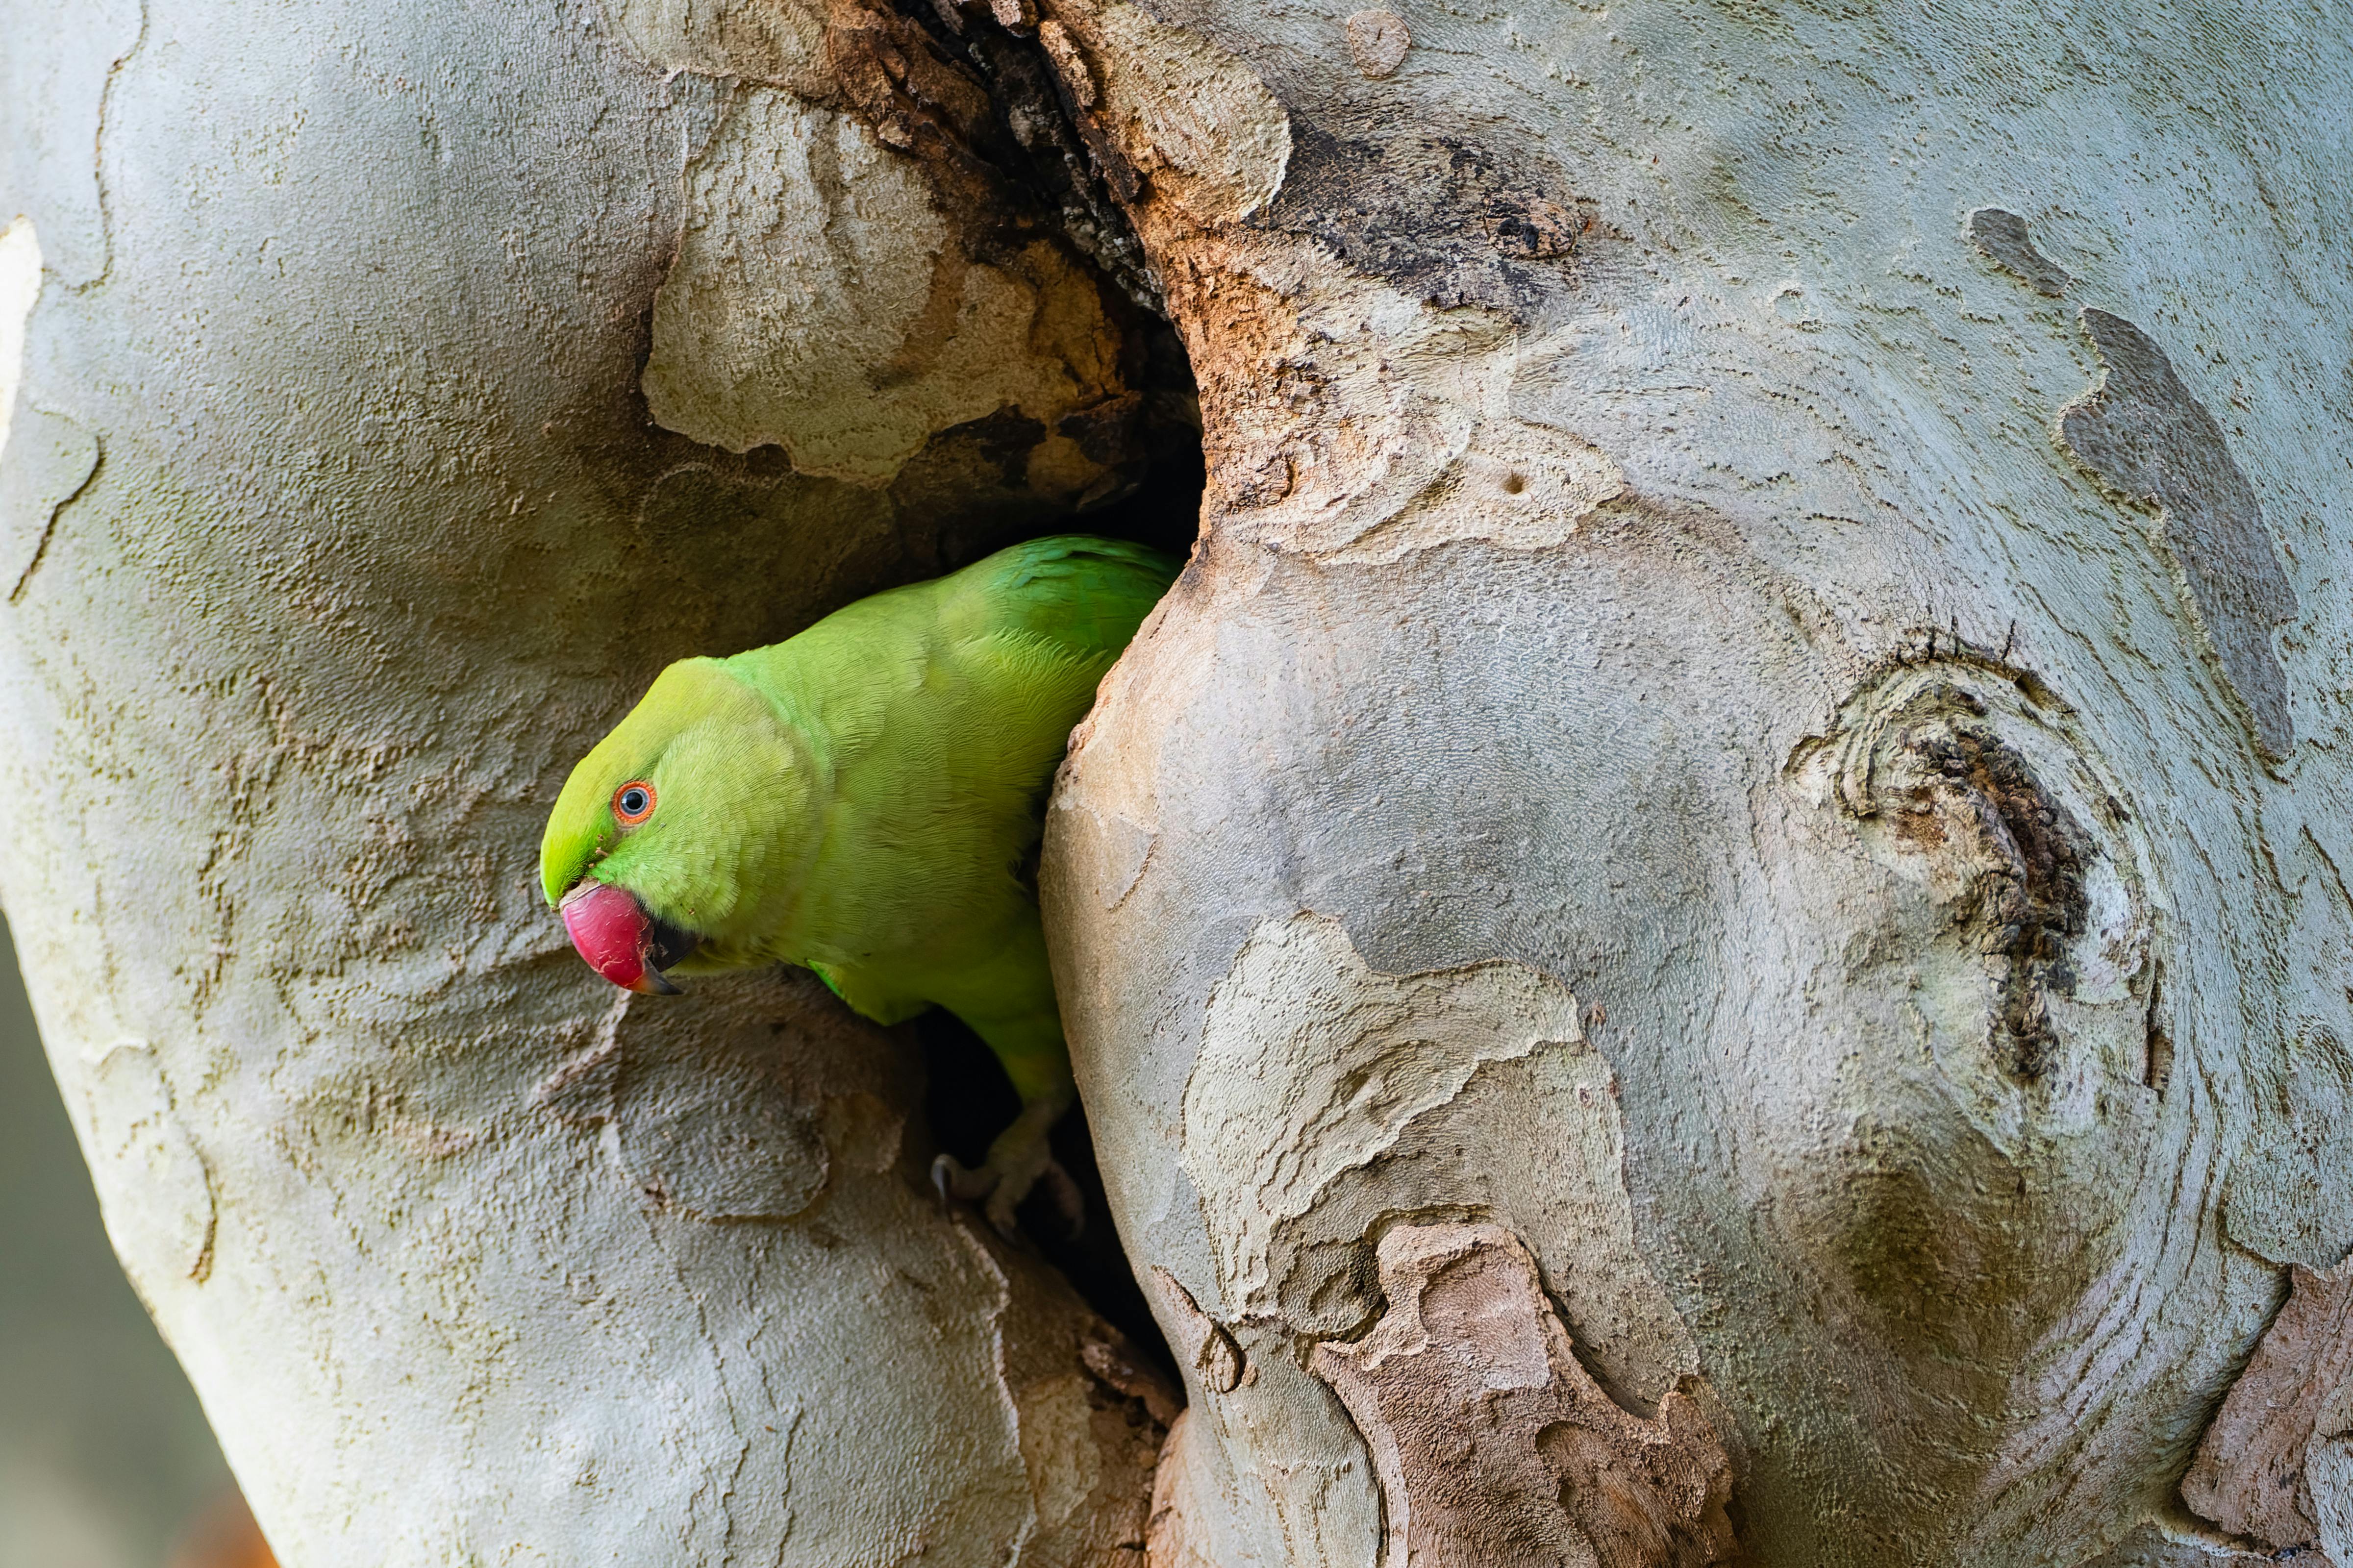 rose ringed parakeet – Don't hold your breath